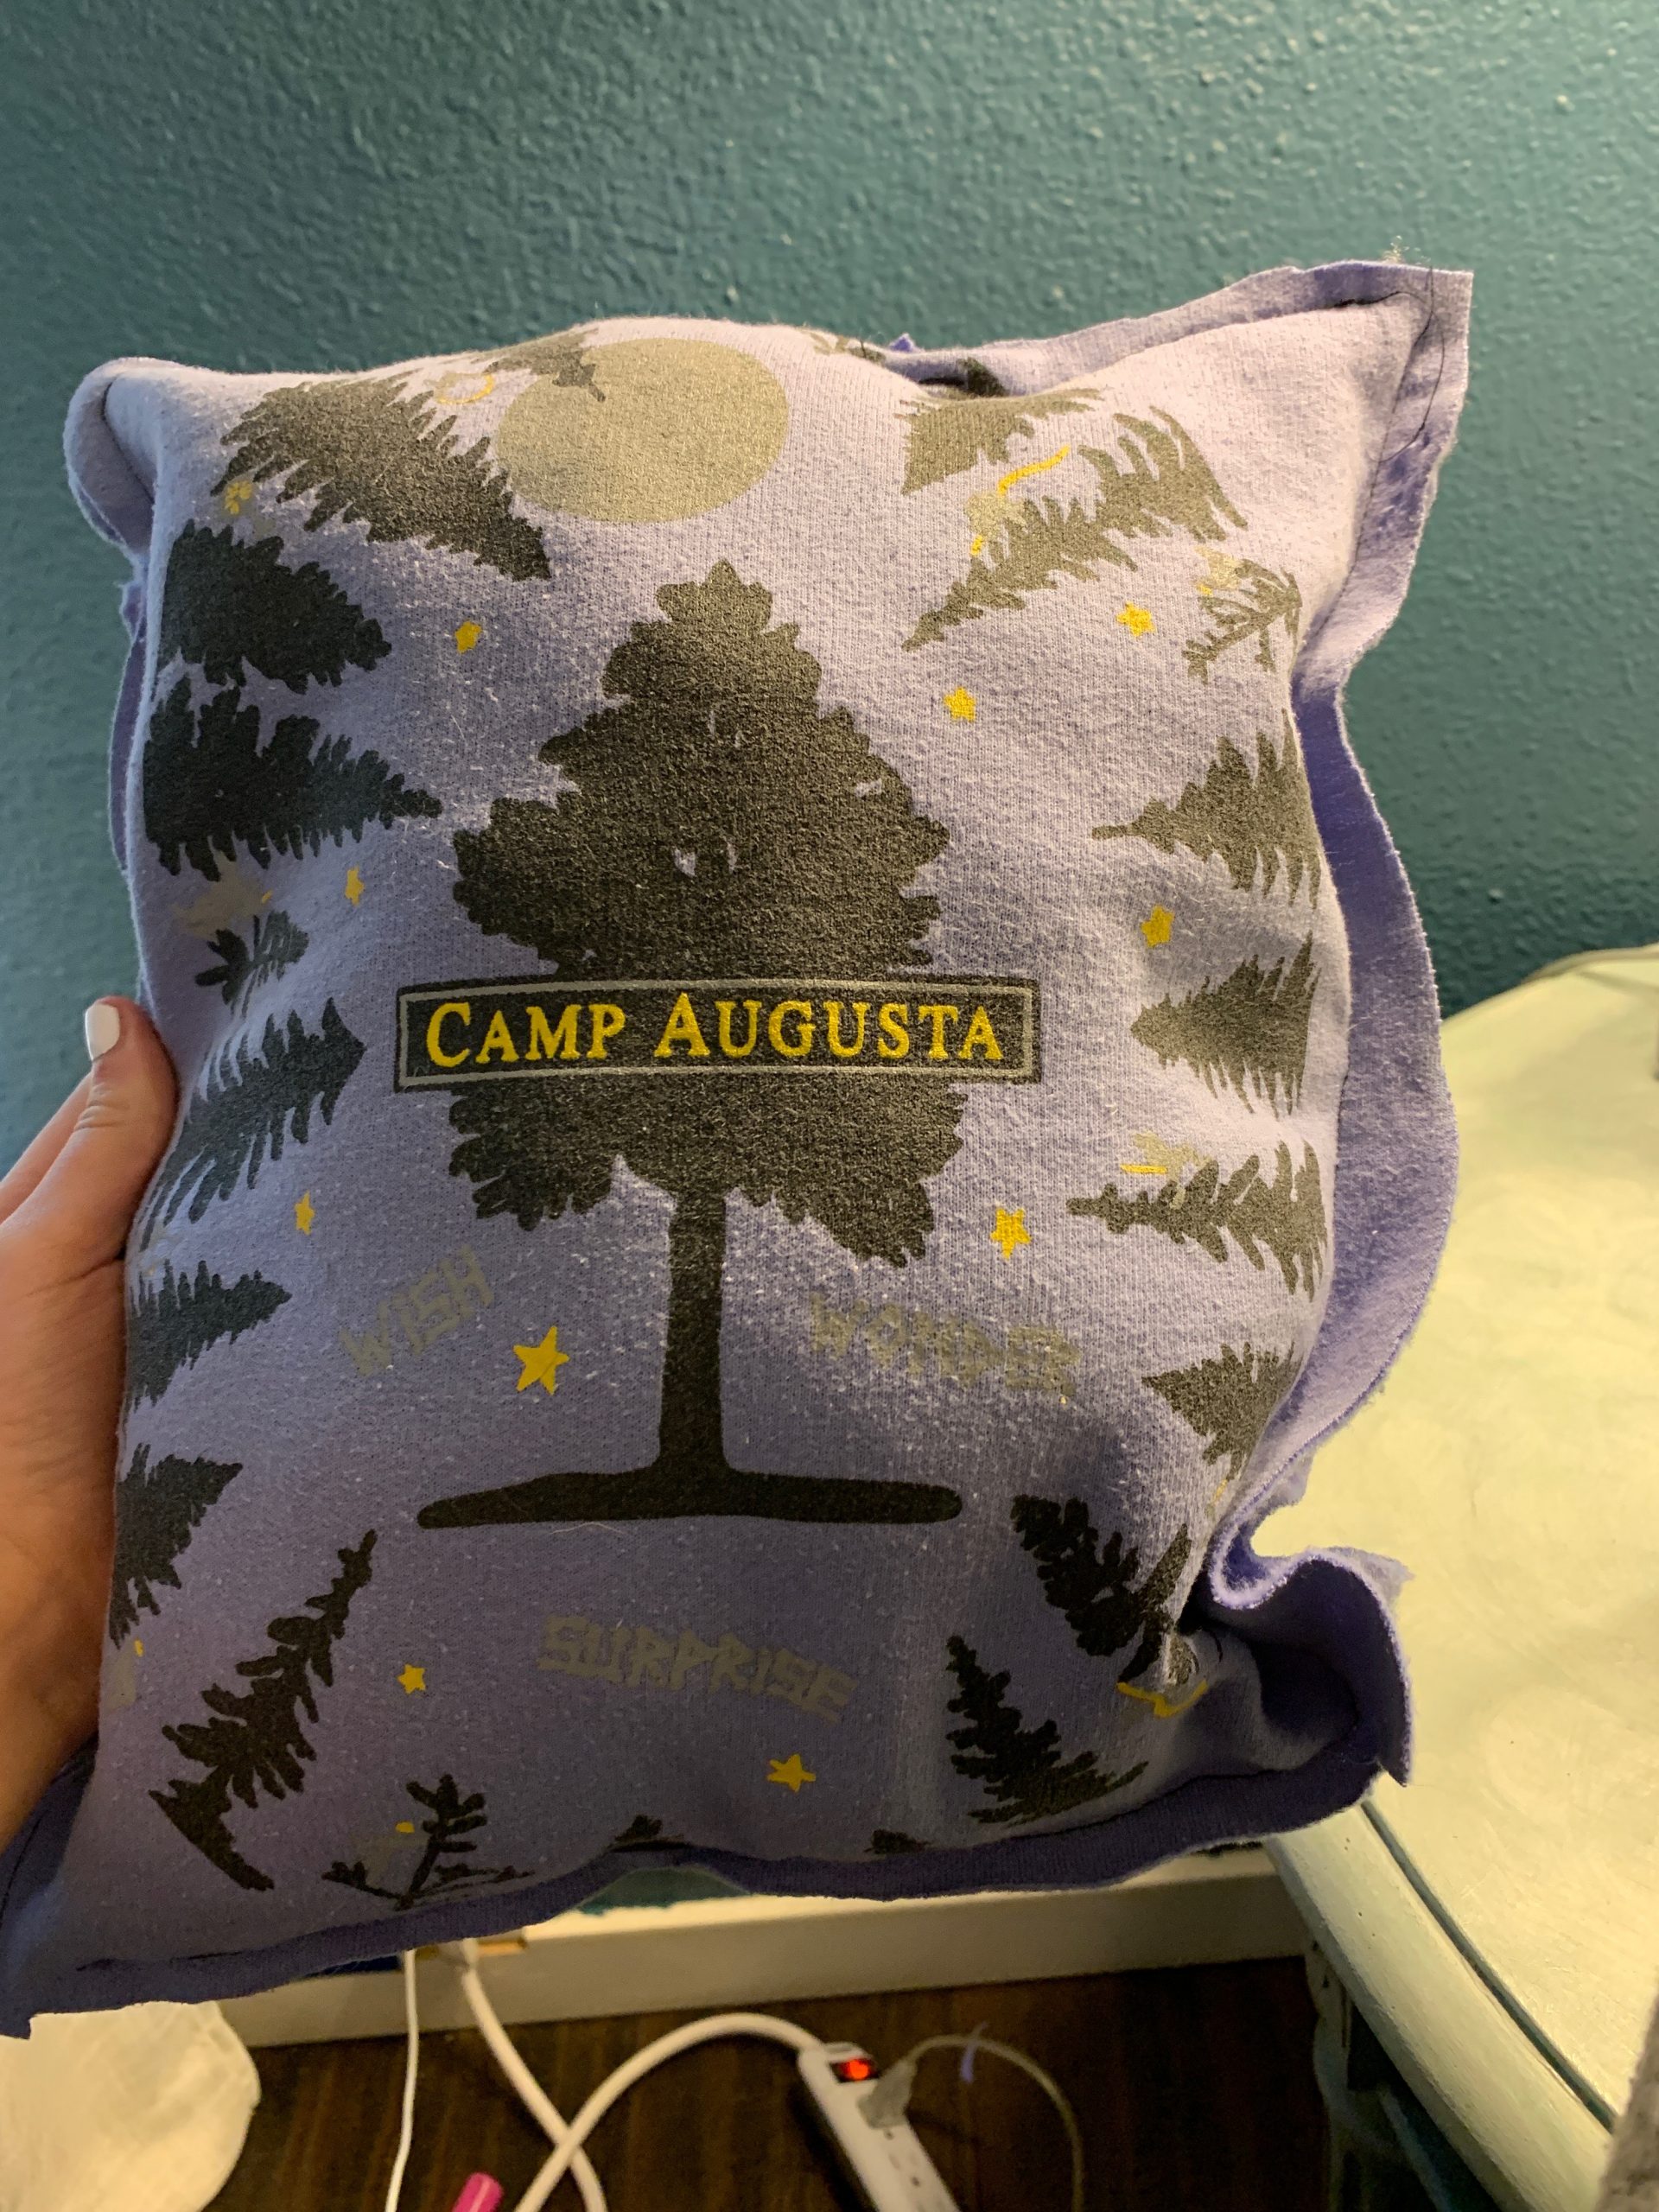 Upcycling Camp Augusta T-Shirt into a Pillow